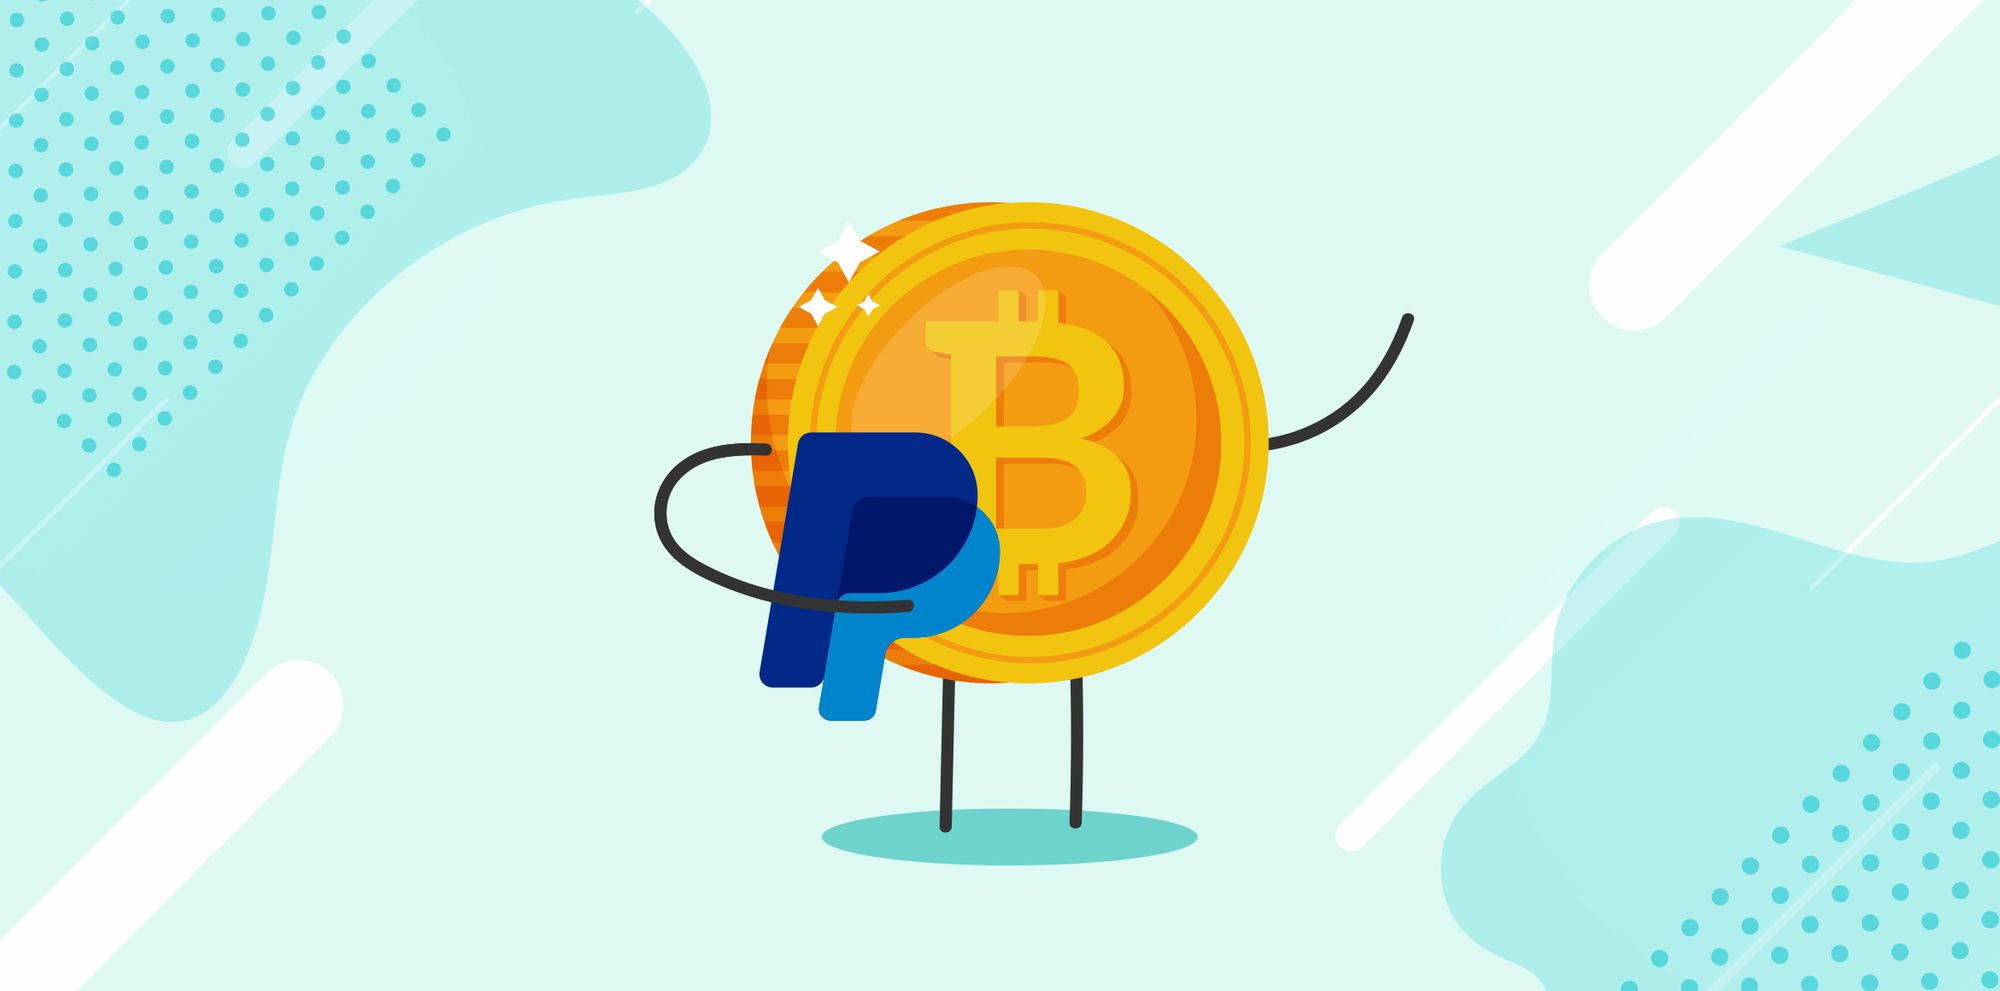 Buy Bitcoin with Paypal: Guide on How to Buy Bitcoin with Paypal in 2021